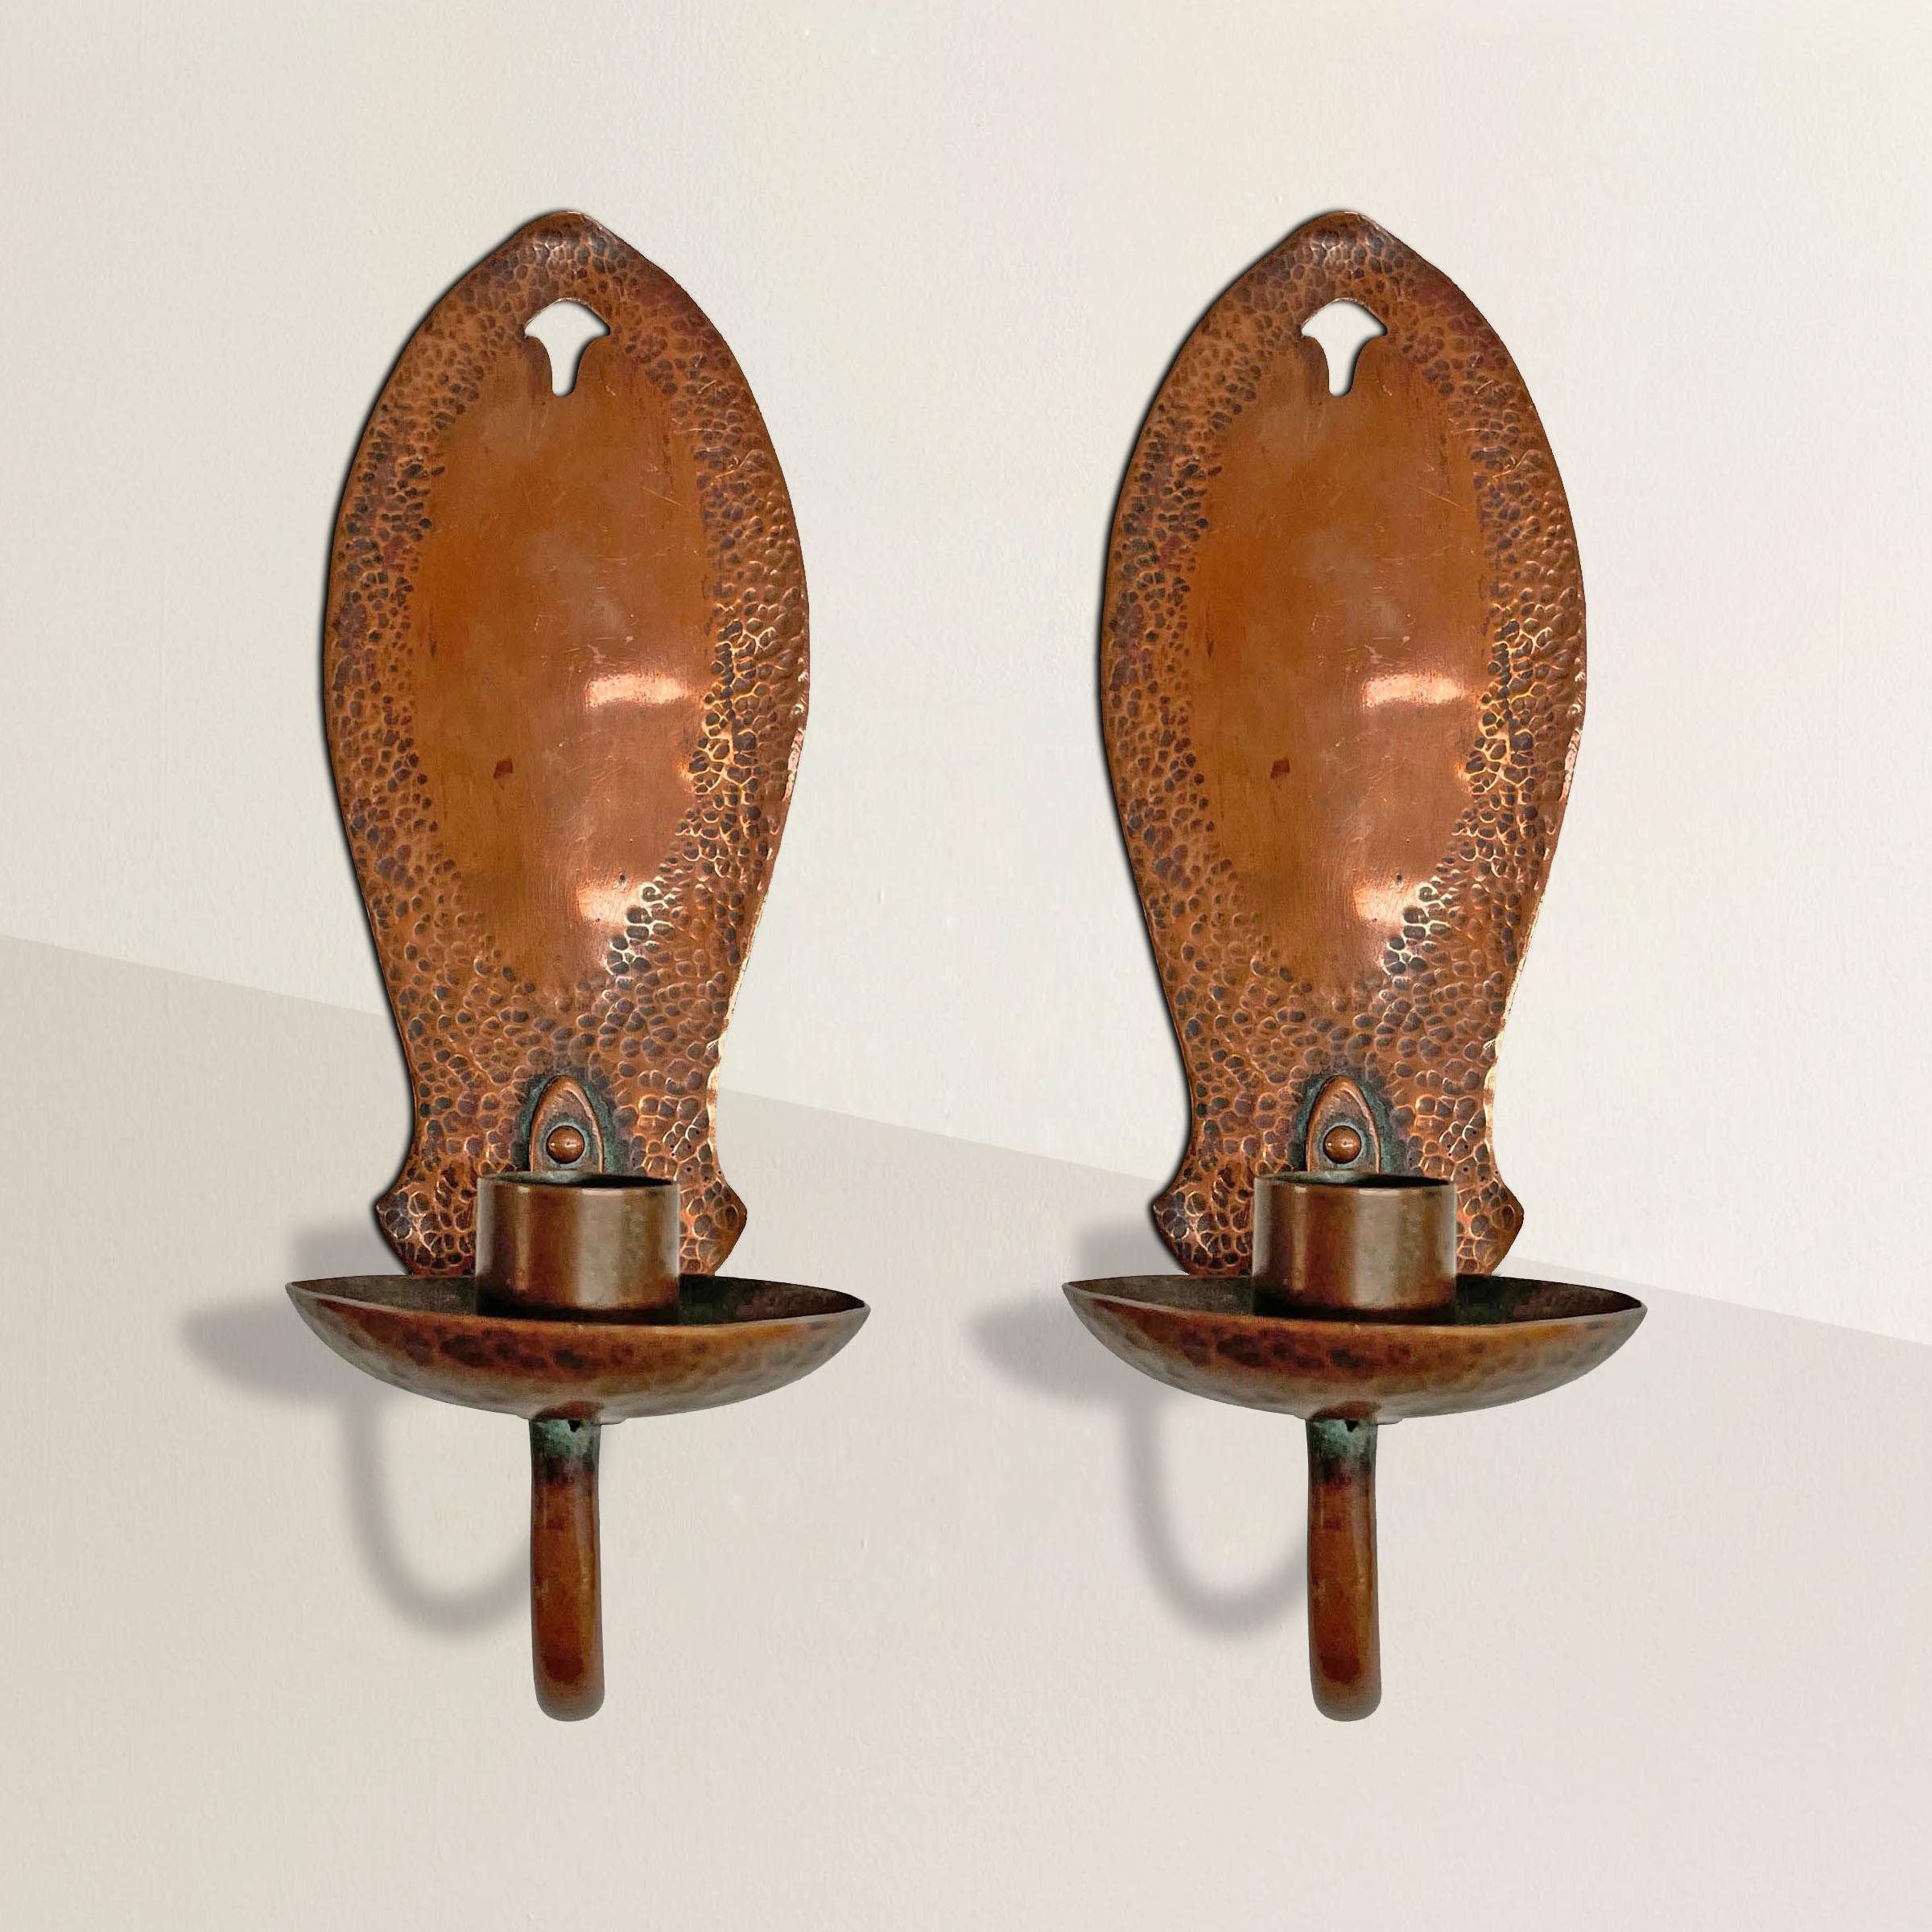 A handsome pair of late 19th century English Arts & Crafts copper candle sconces with hand-hammered backplates, a hammered candle cup attached to a simple curved arm with a sweet floral rivet, and one of the best patinas we've seen in a long time.